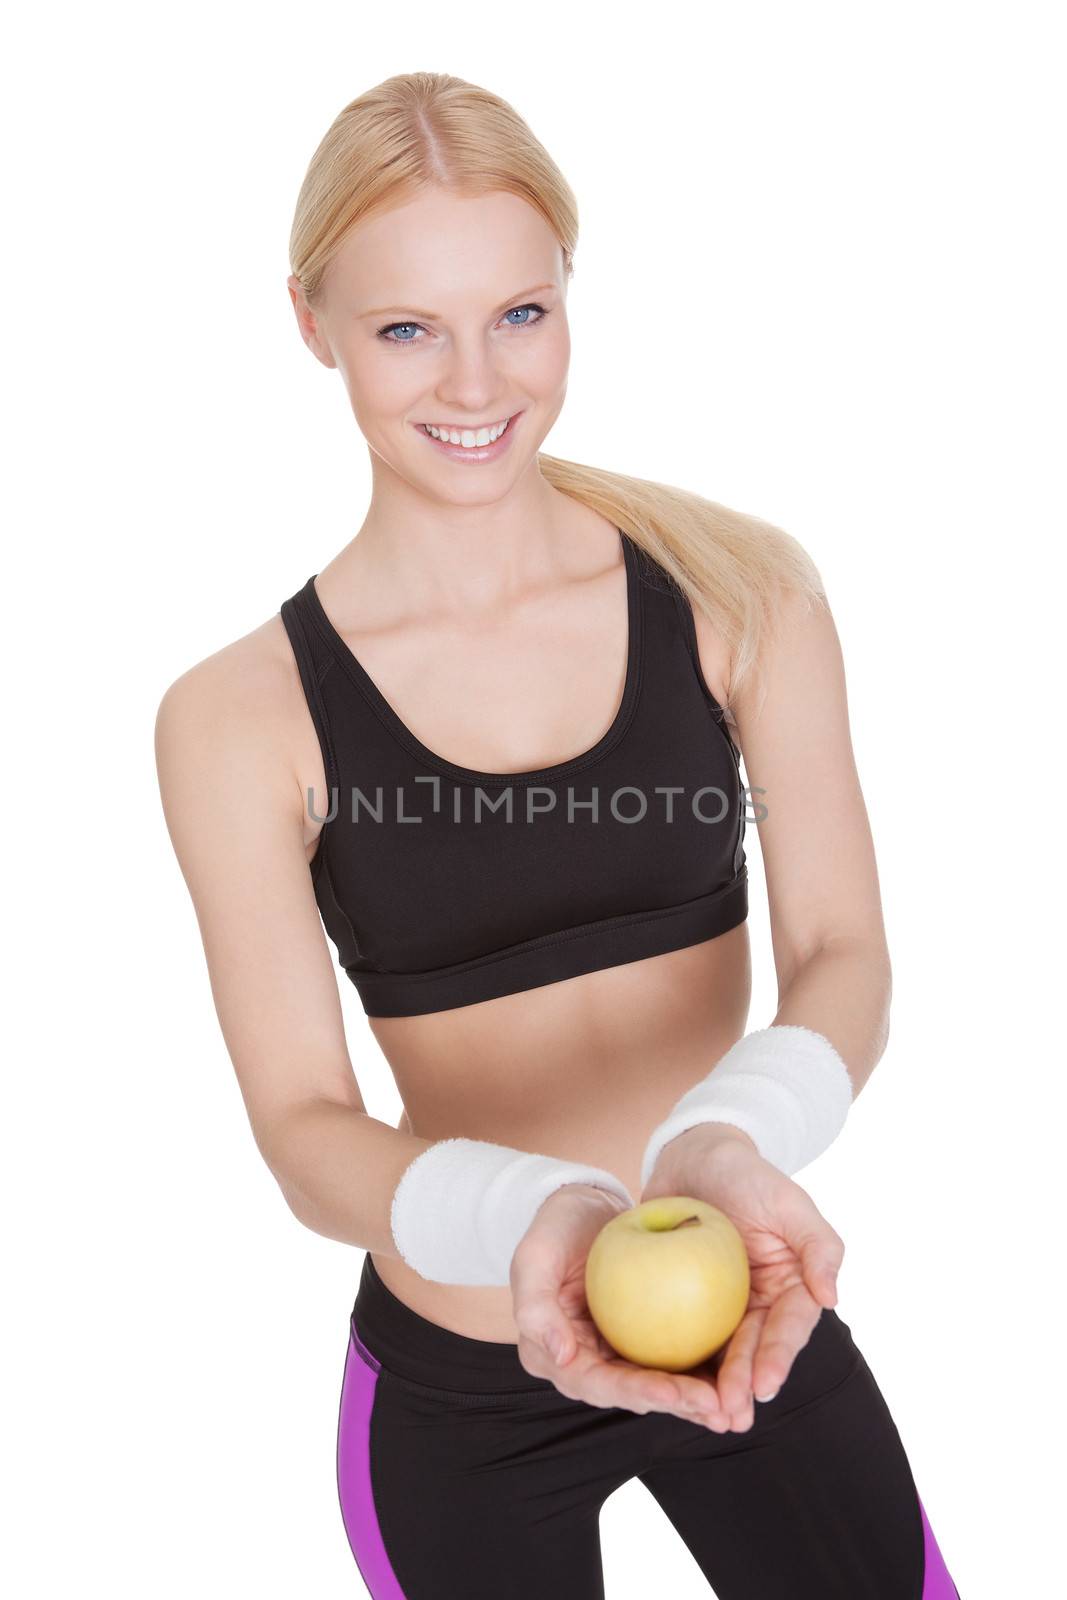 Beautiful young fitness woman holding apple. Isolated on white